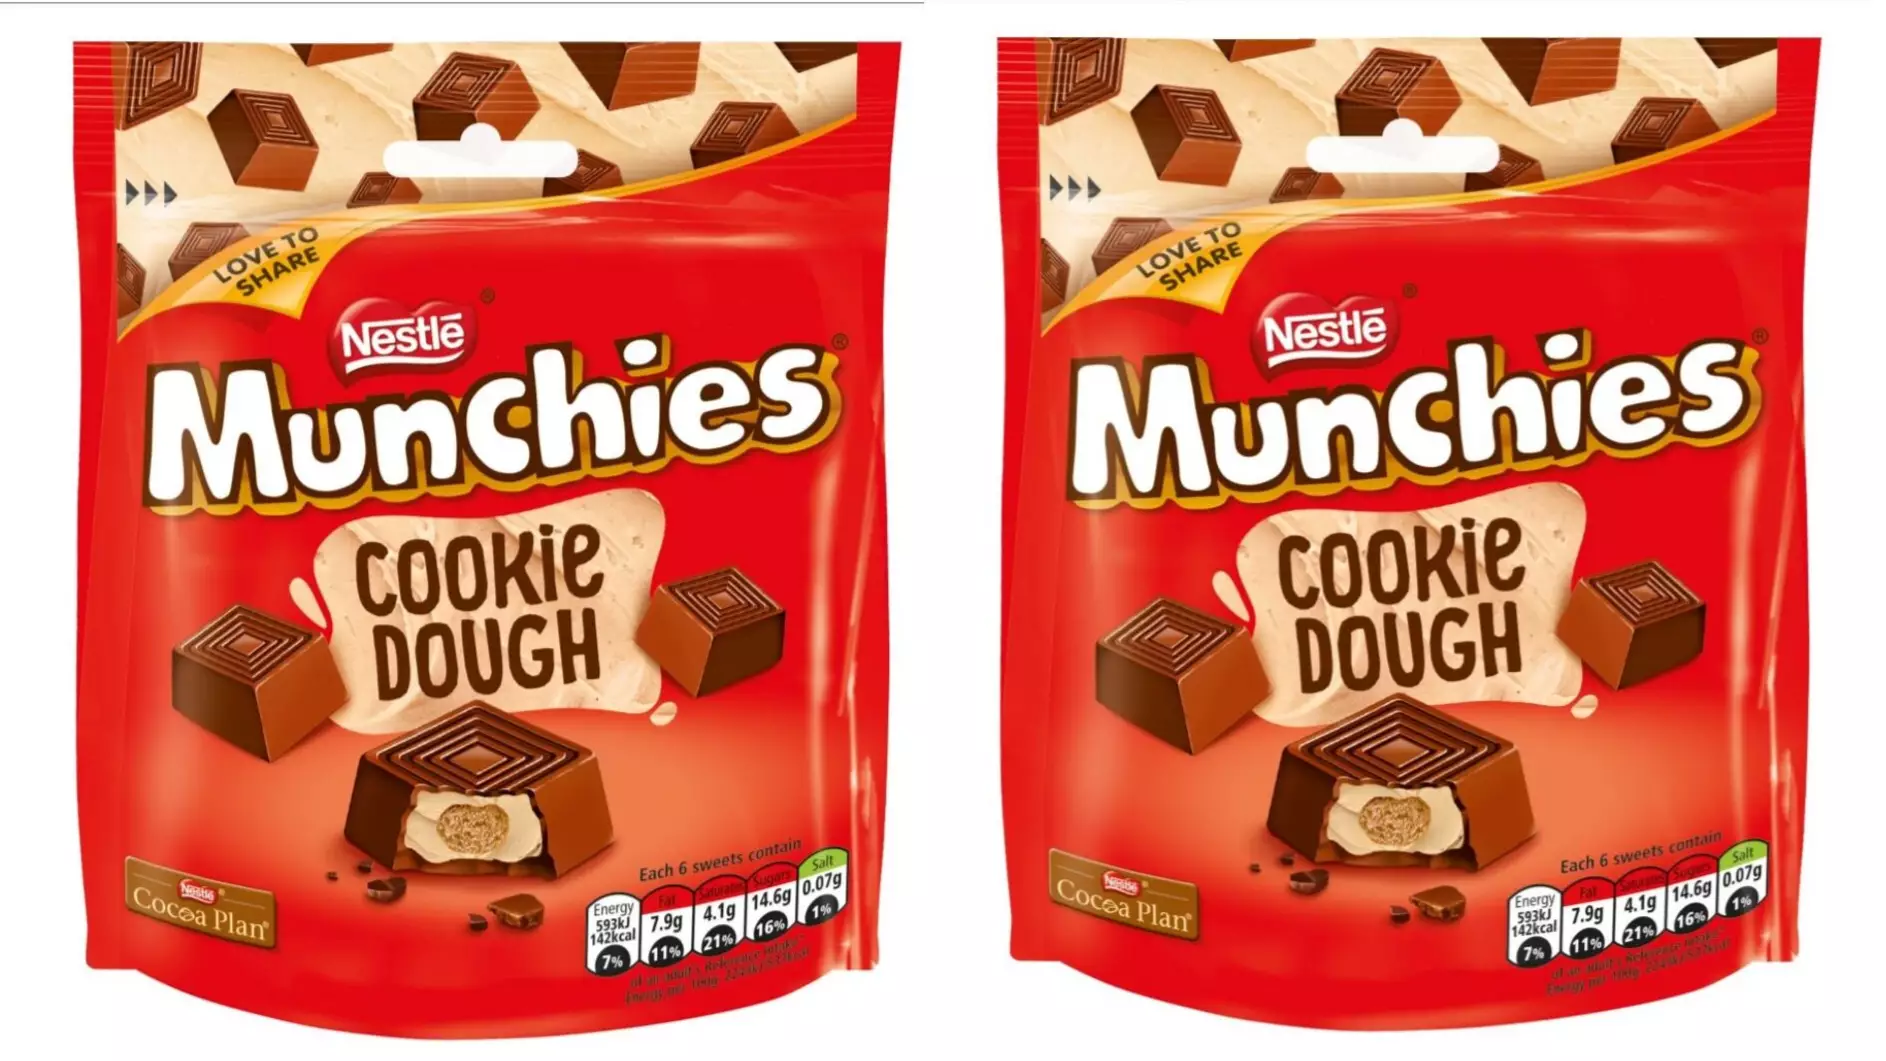 Munchies Has Released A Brand-New Cookie Dough Flavour And We Know Where You Can Get Your Hands On A Bag